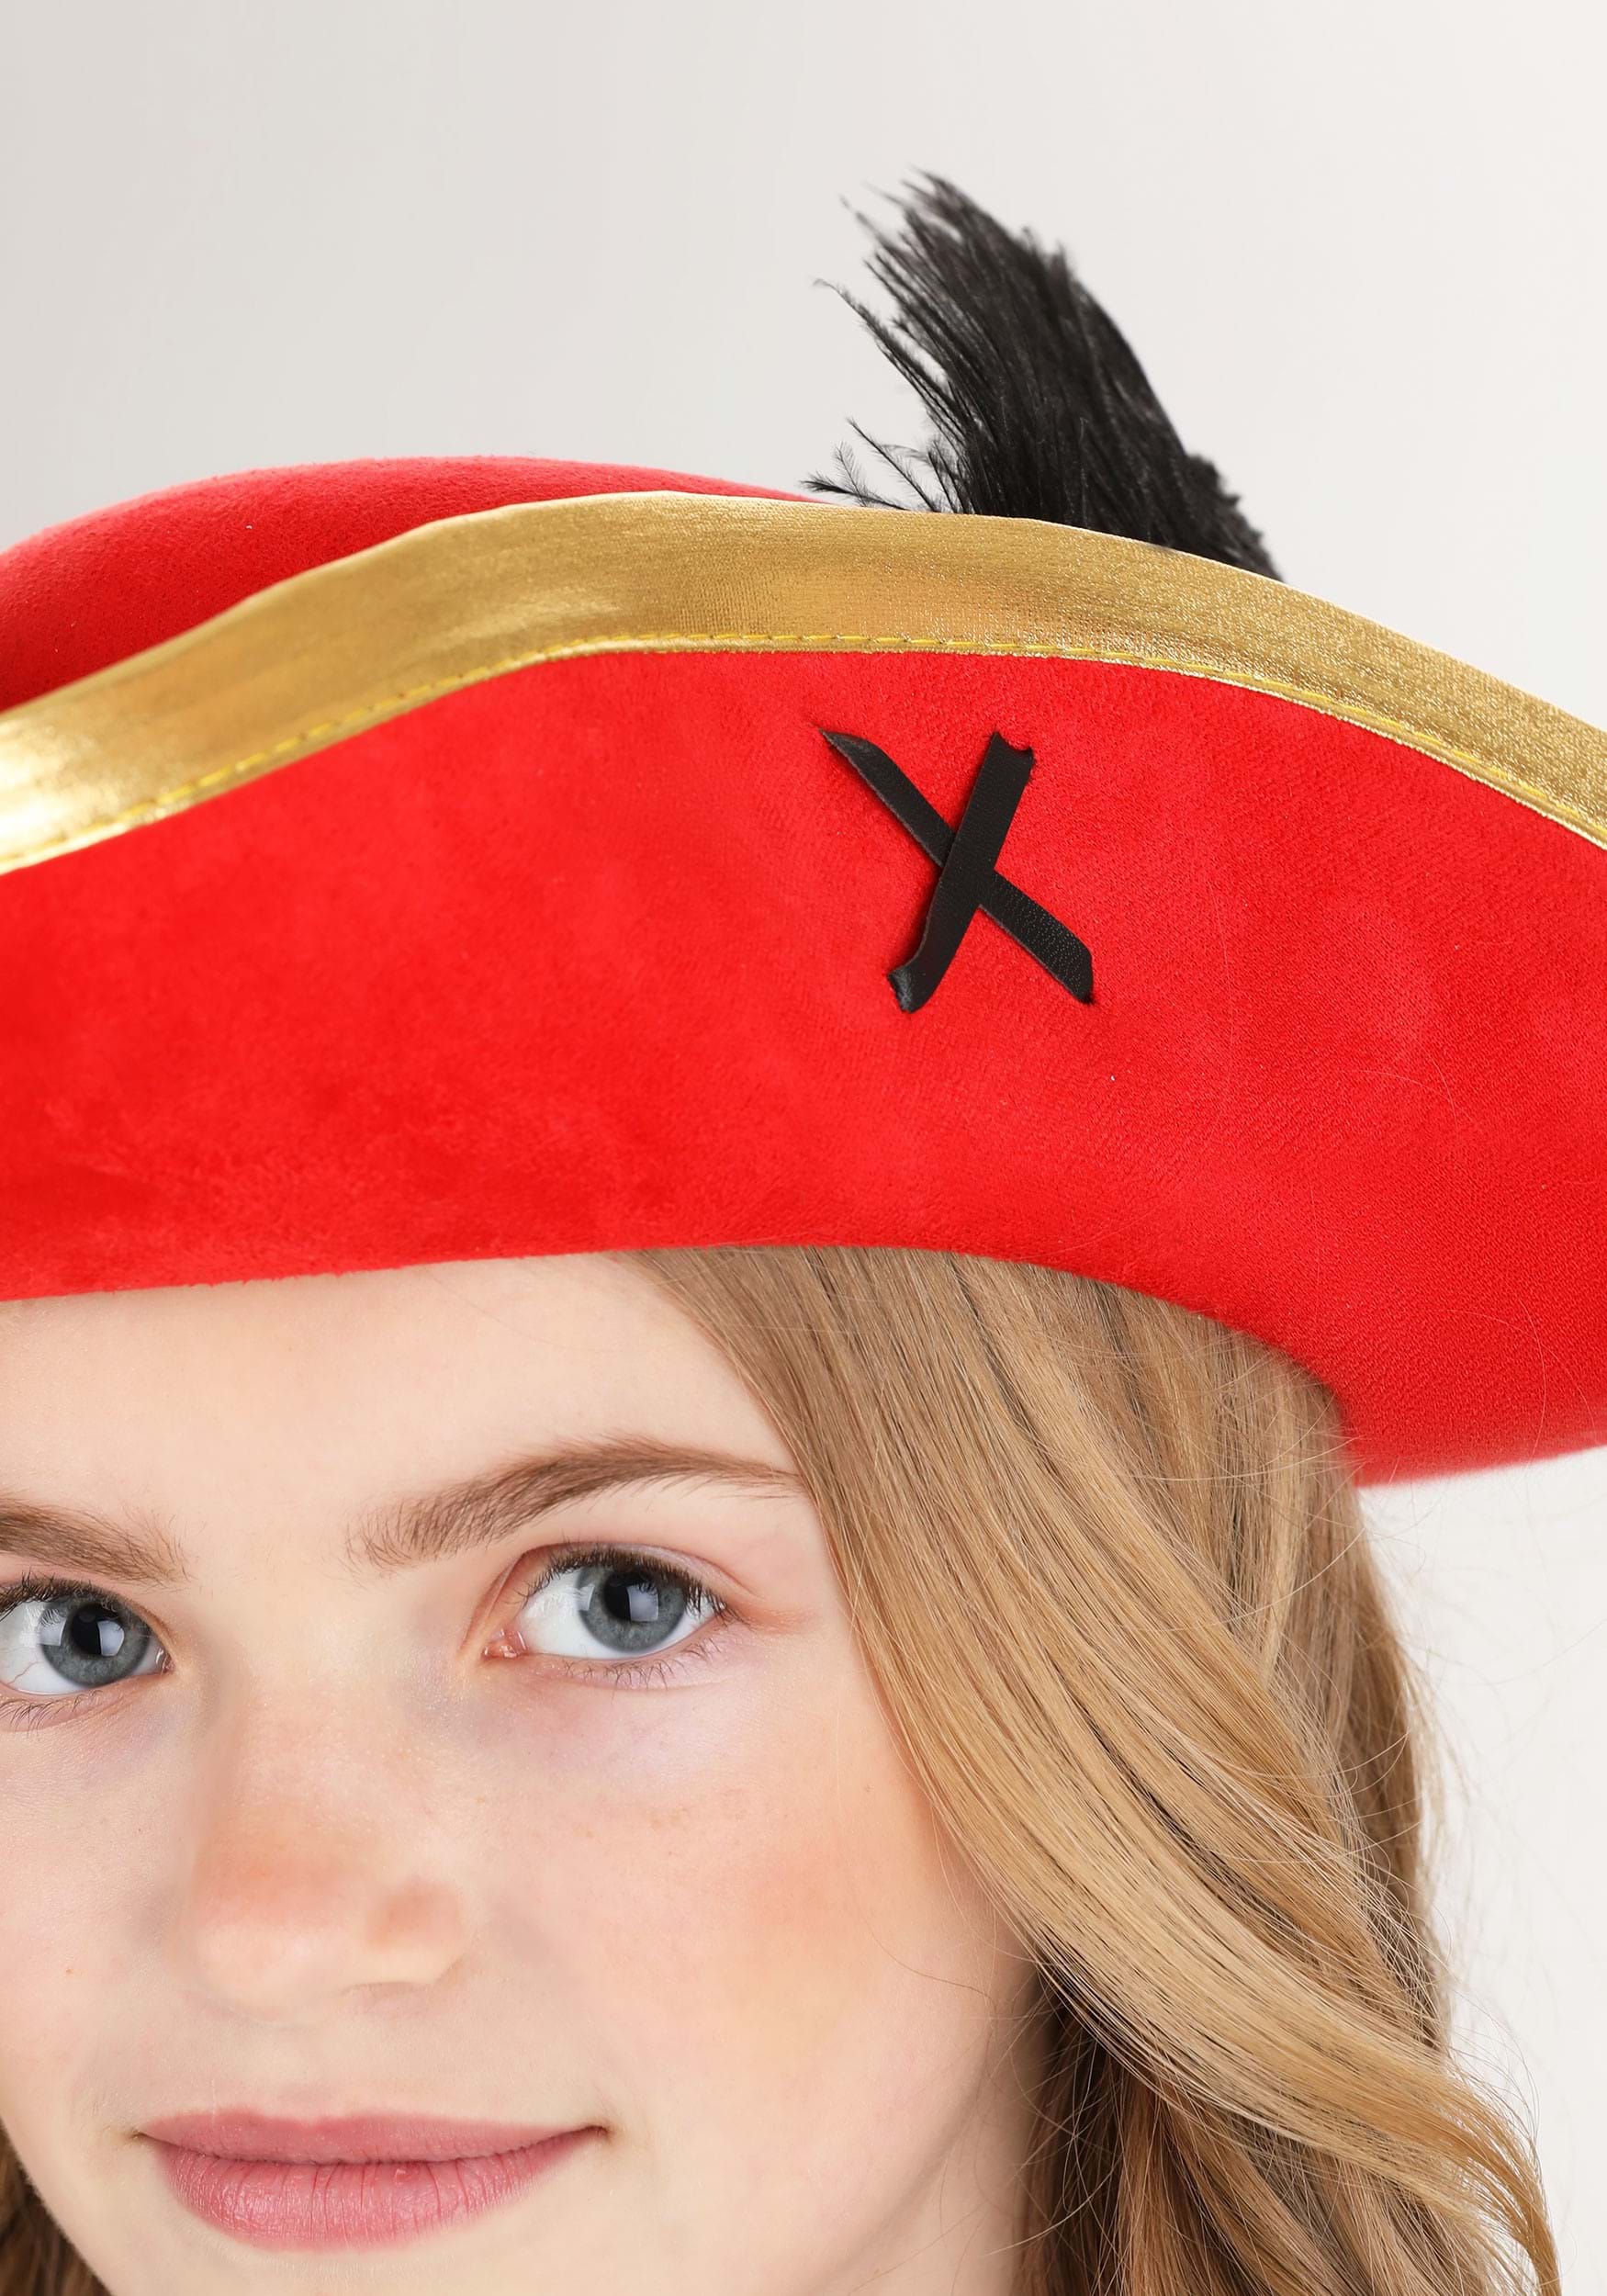 Red Skull And Crossbones Pirate Costume Accessory Hat